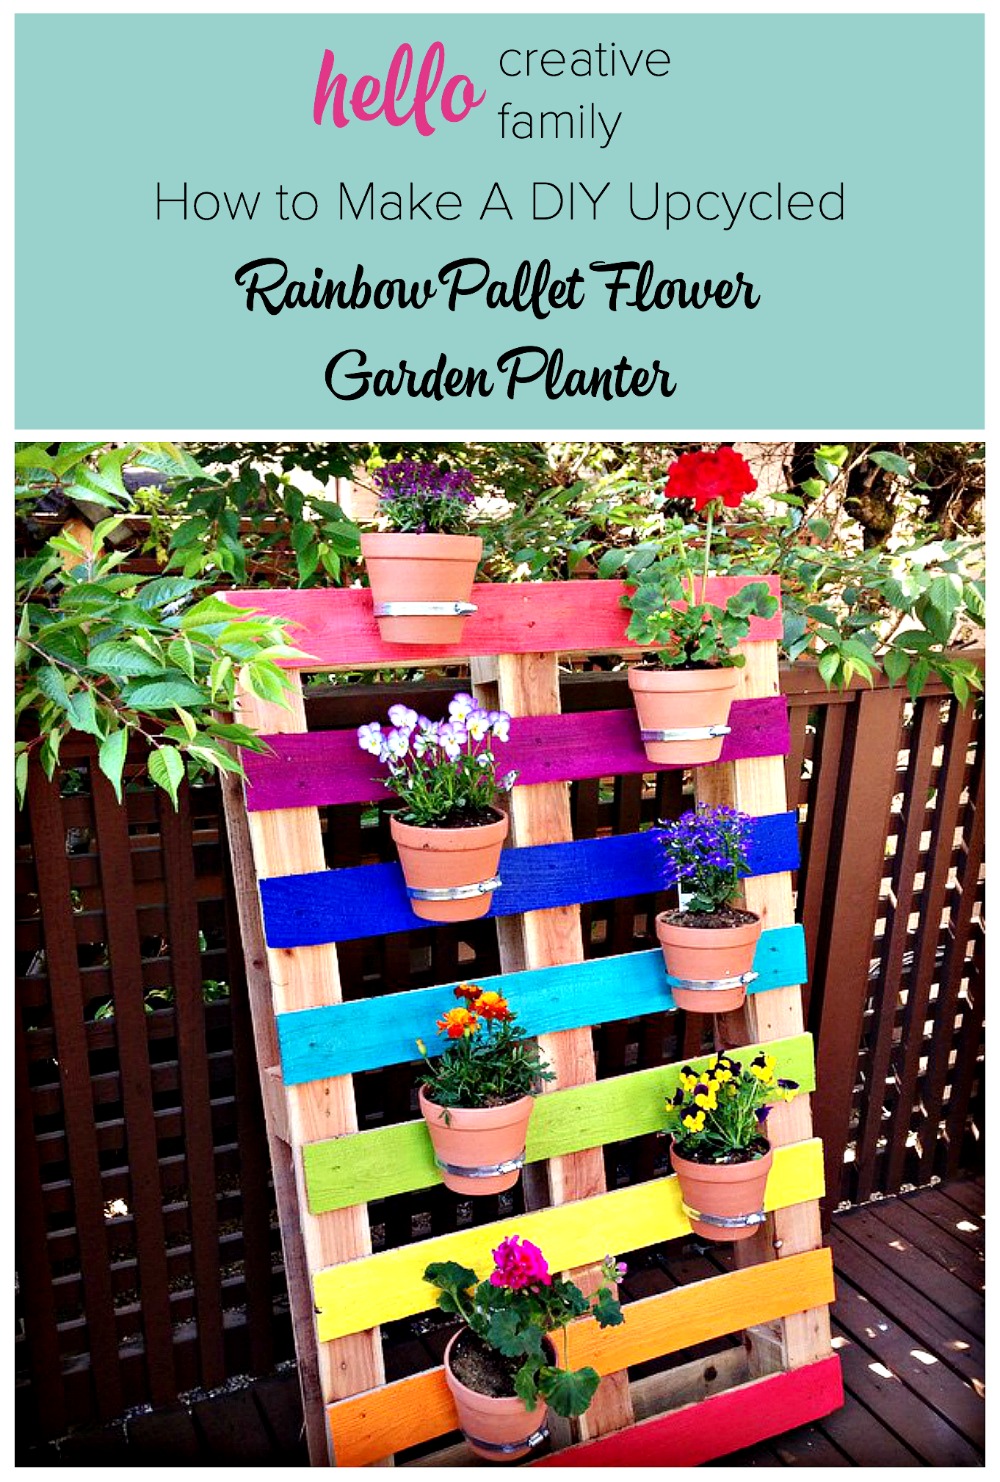 Create a bright and colorful upcycled rainbow pallet planter project with these simple instructions from Hello Creative Family. An easy and fun family weekend project that kids will love.